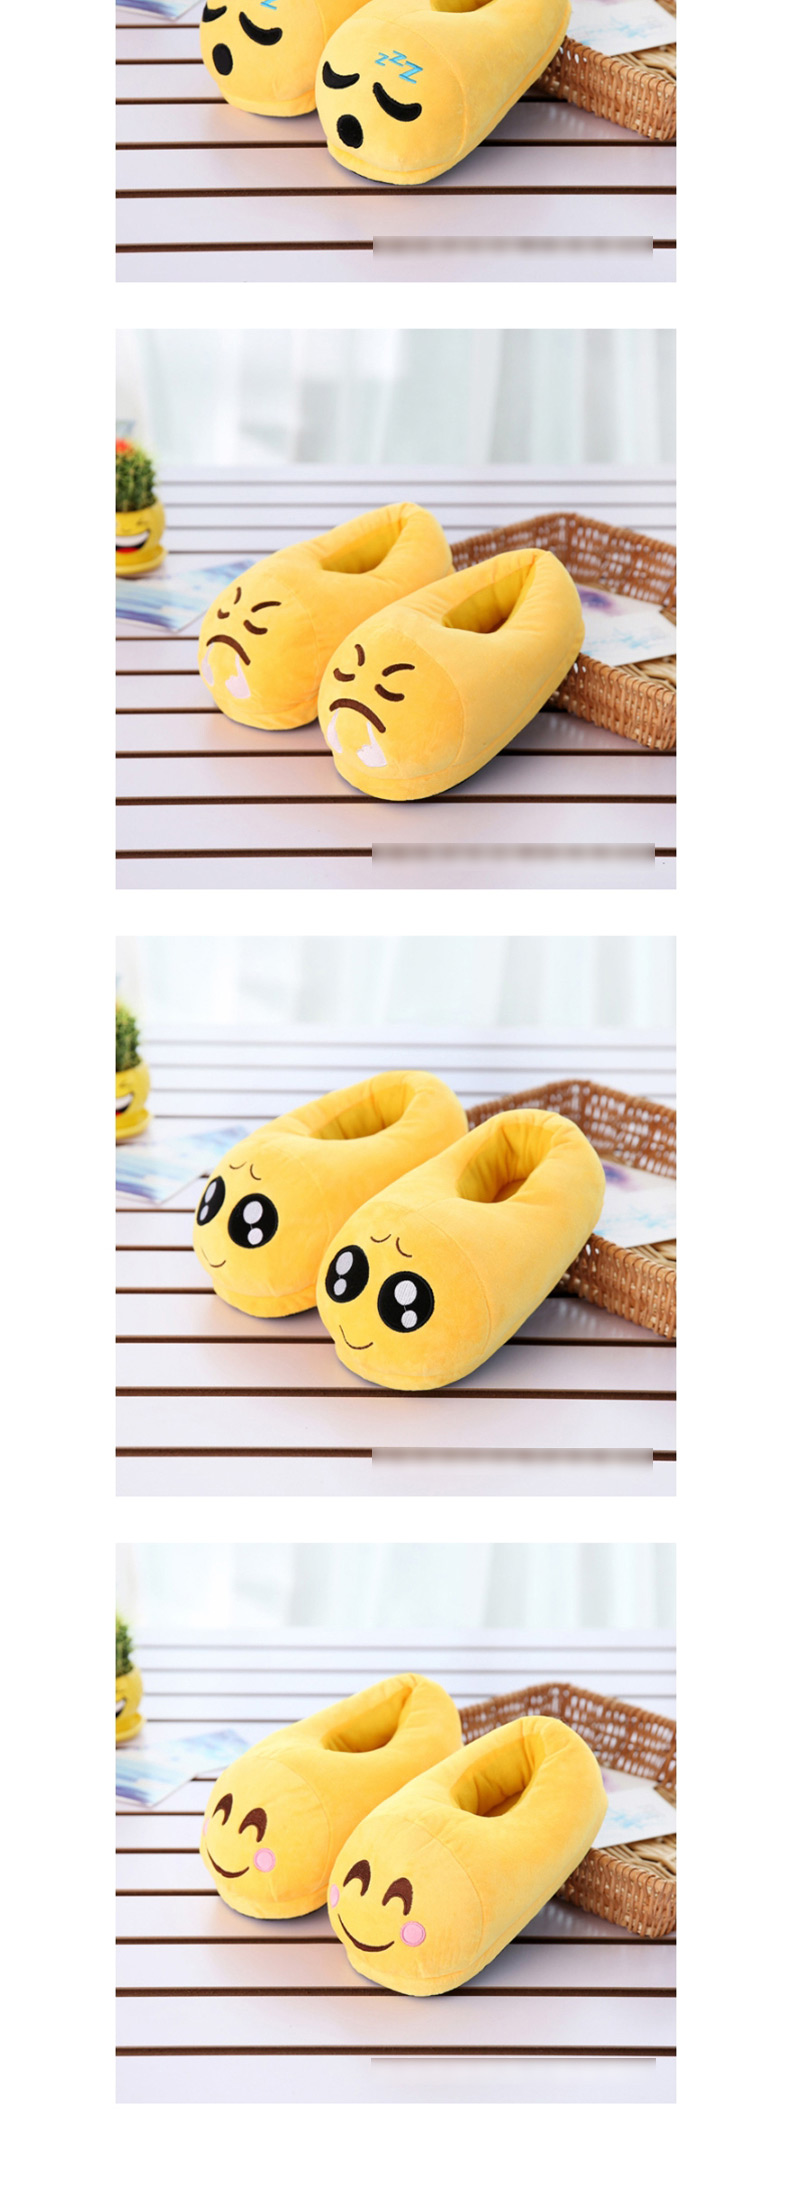 Fashion 11 Yellow Sweat Cartoon Expression Plush Bag With Cotton Slippers,Slippers